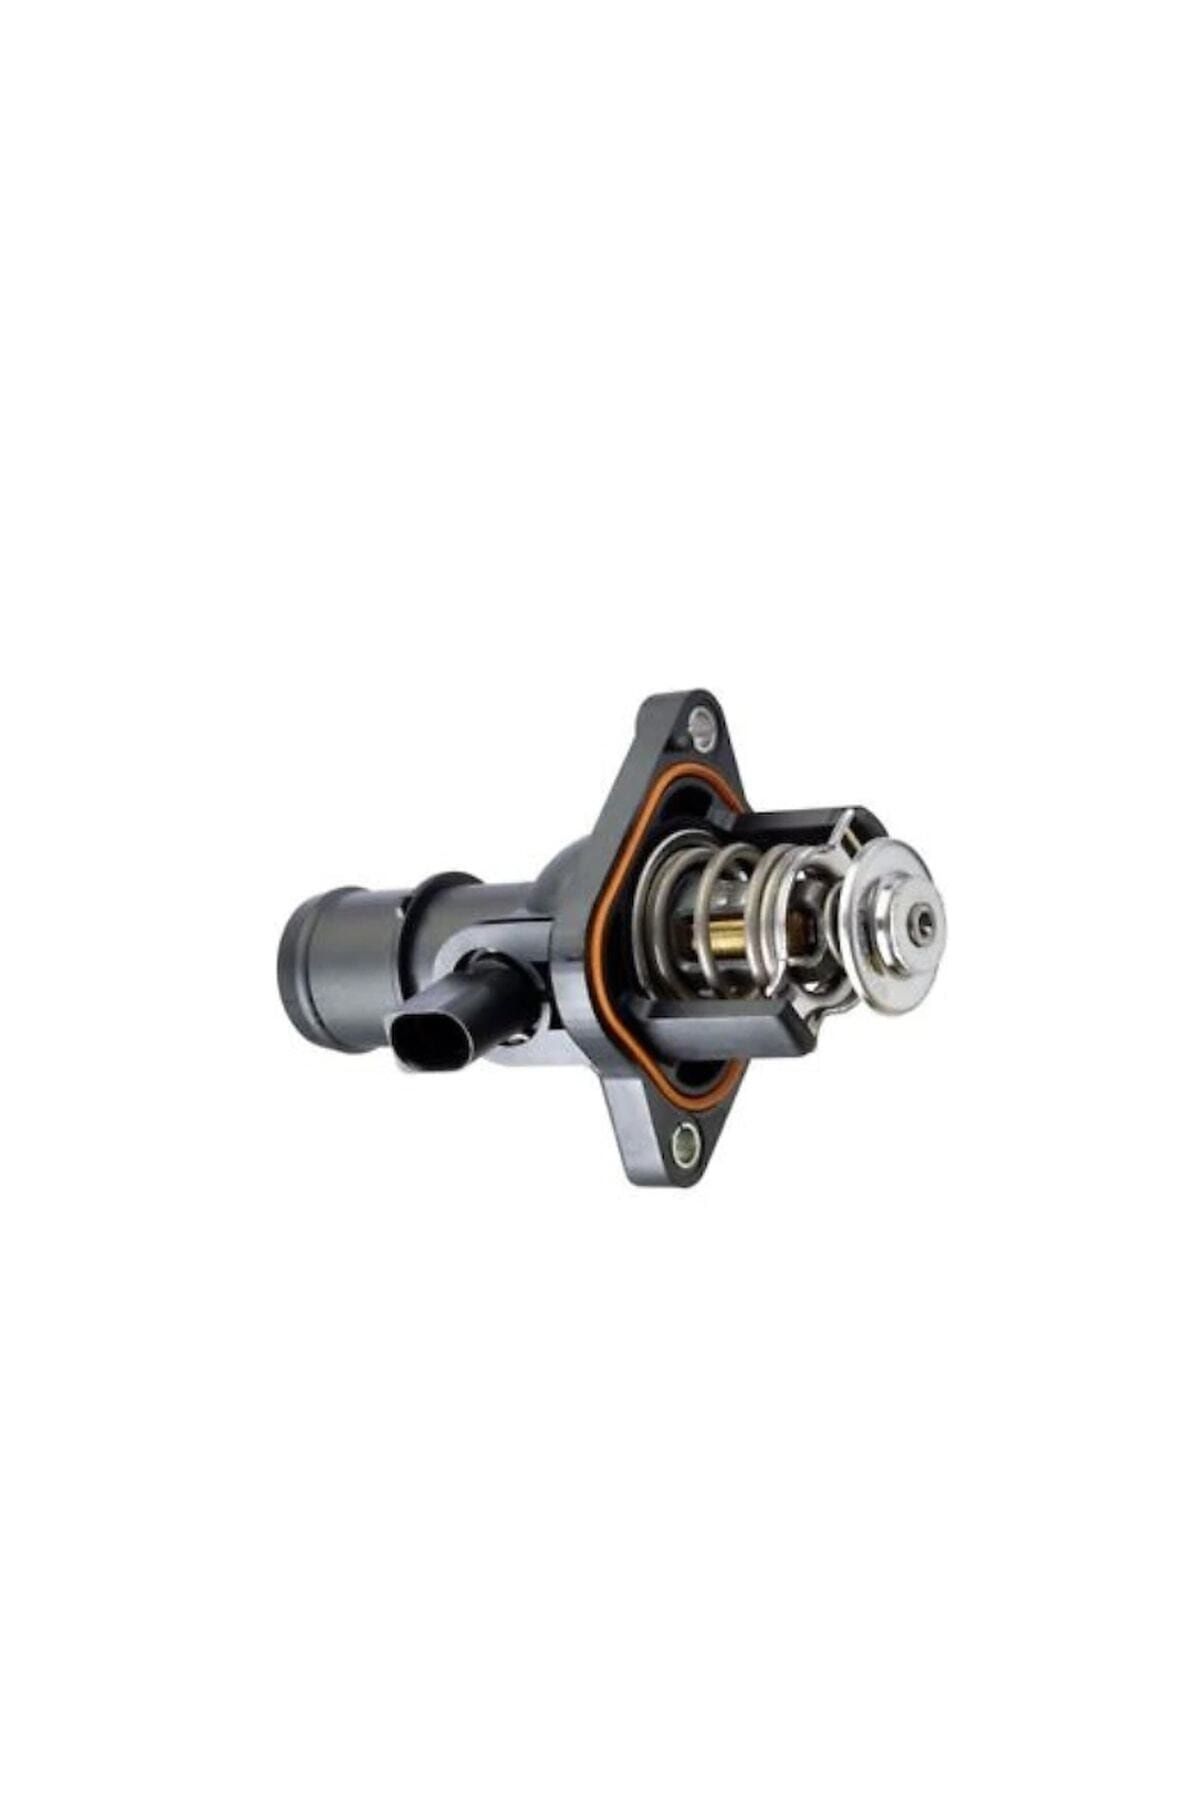 gkl Volkswagen Golf 4 1.6 Bfq 2000 - Thermostat 06a121114 Compatible -  Trendyol